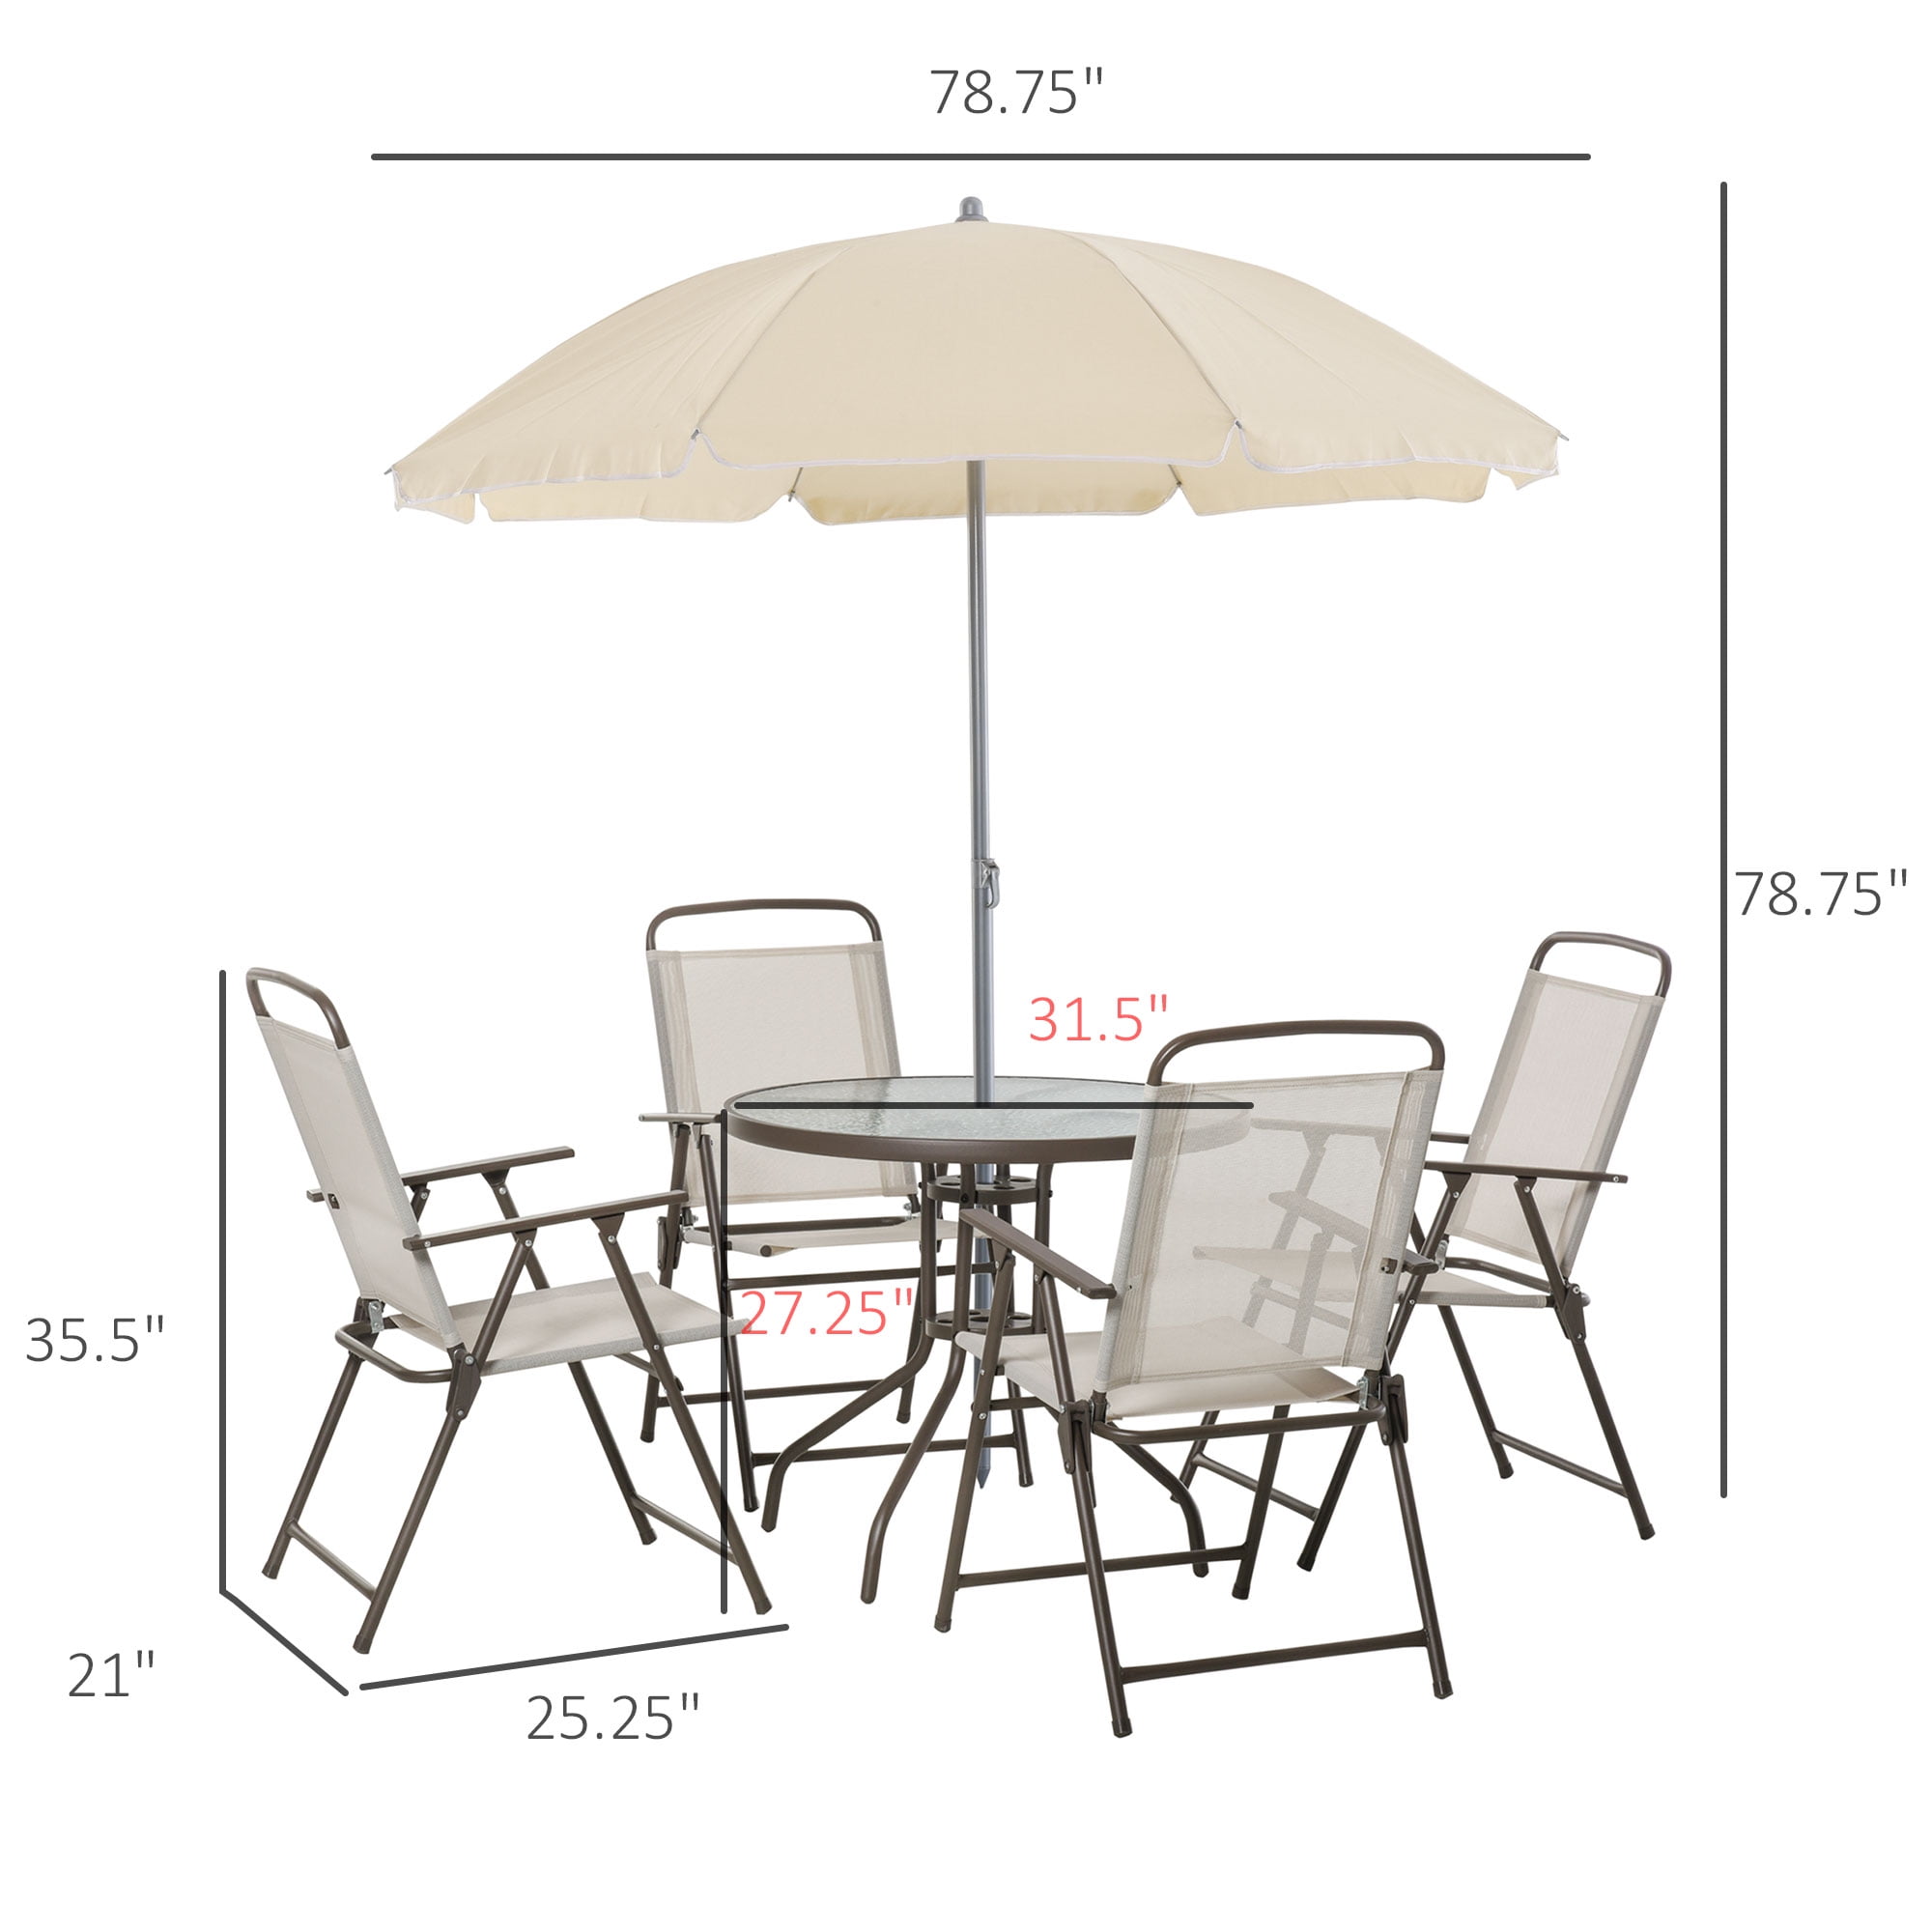 Outdoor Patio Furniture Set 6 Folding Chairs and Rectangle Dining Table Black Outsunny 8 Piece Patio Dining Set with Table Umbrella 